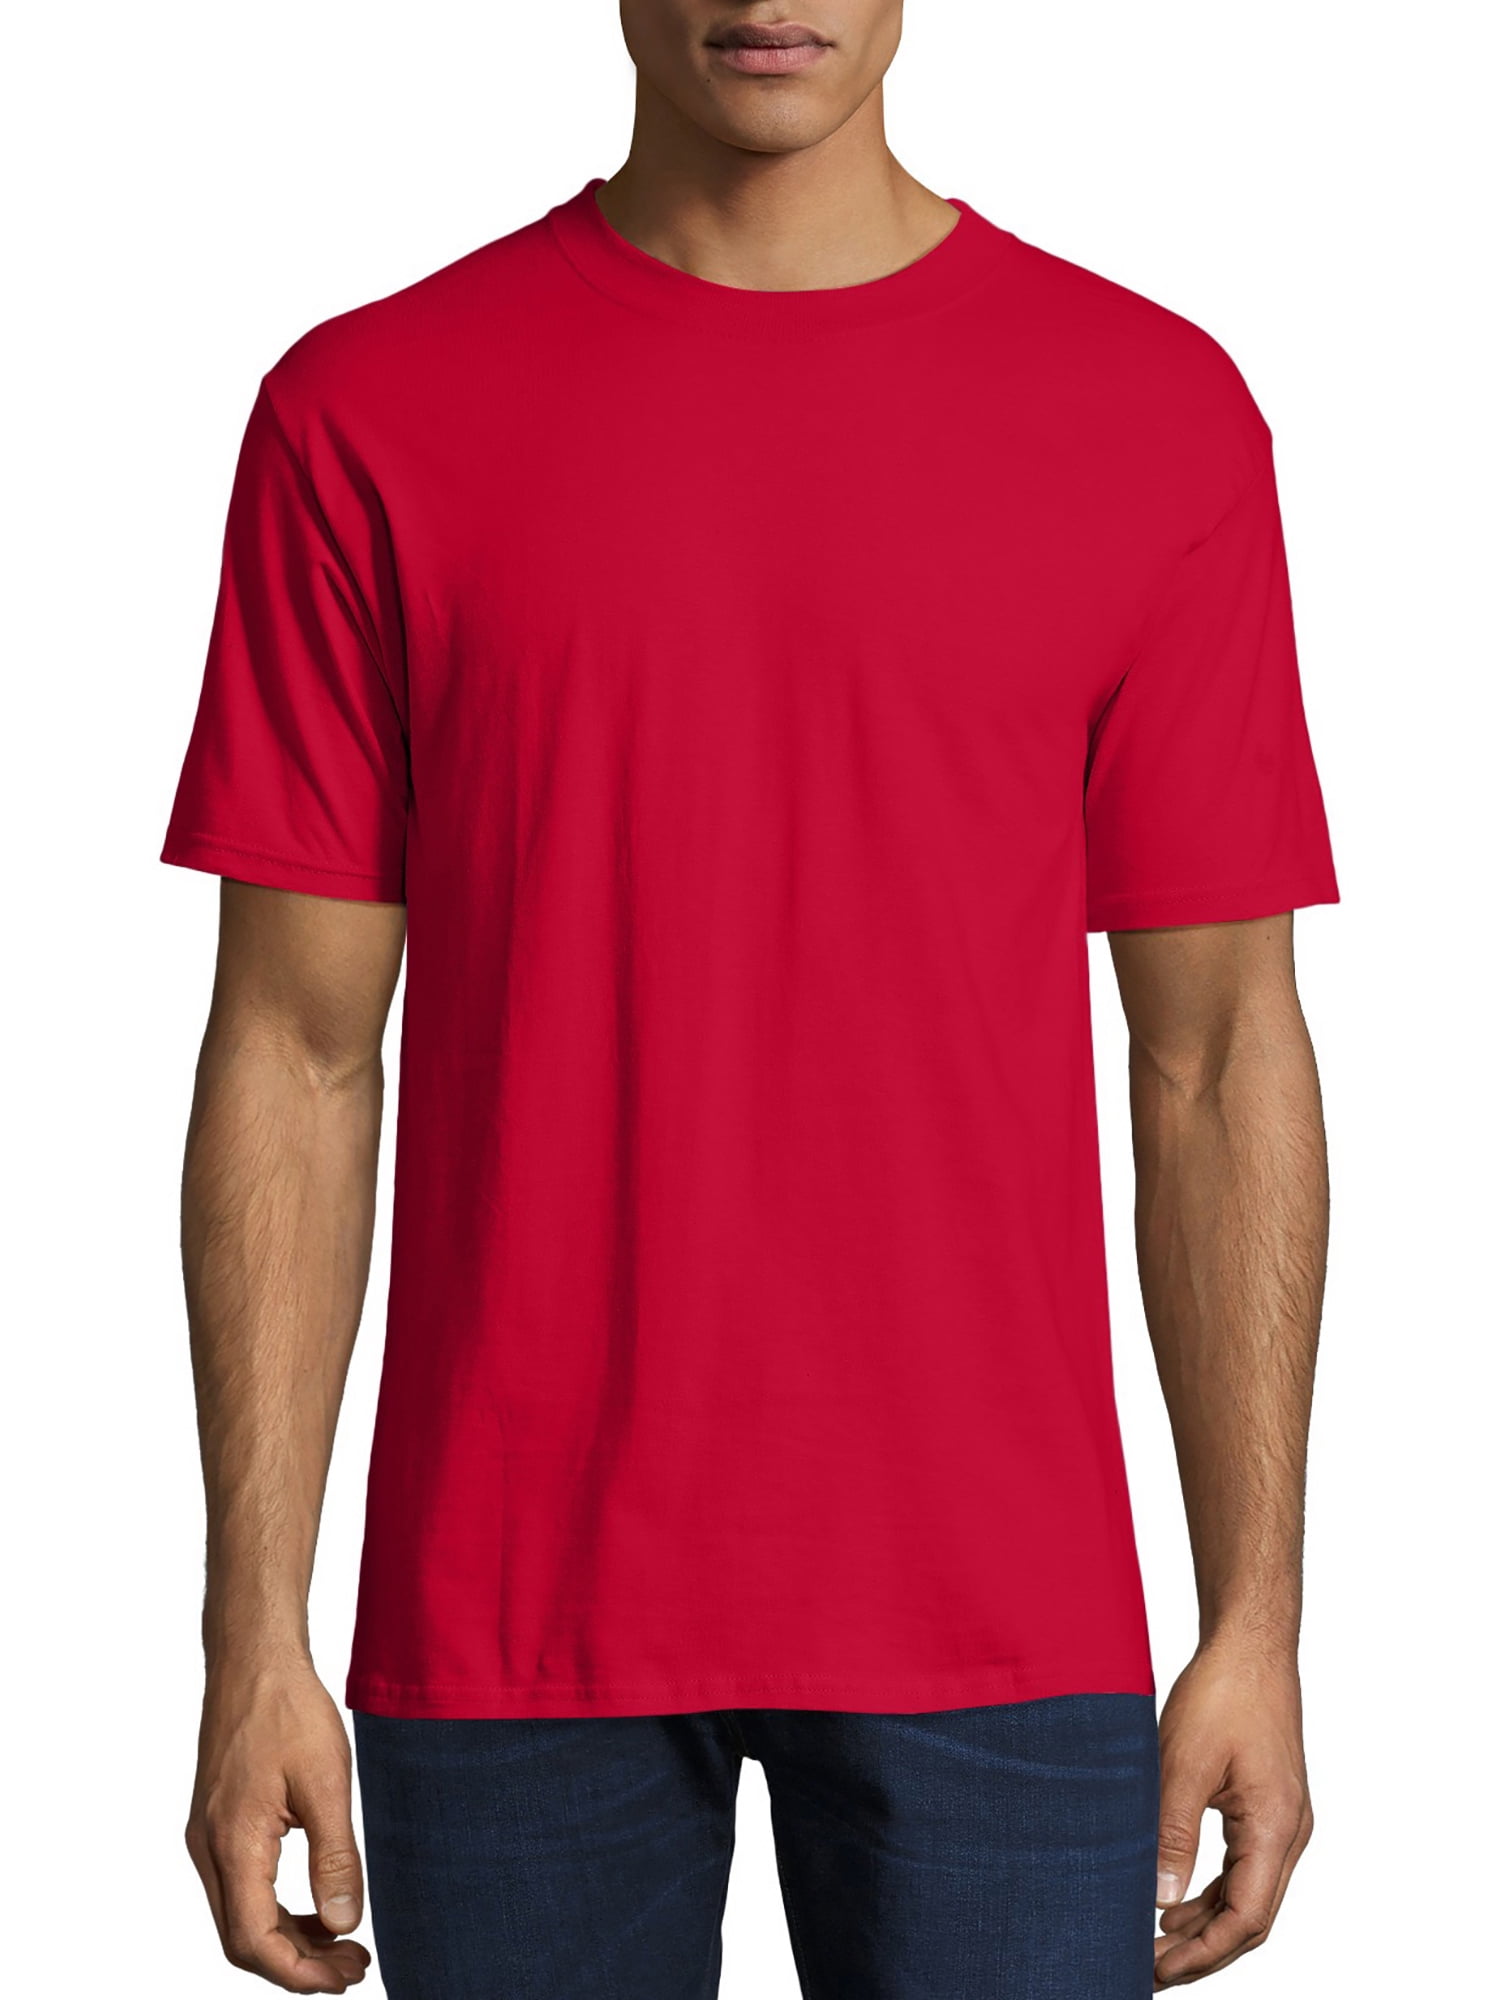 510 Blank Tshirts No Model Royalty-Free Images, Stock Photos & Pictures